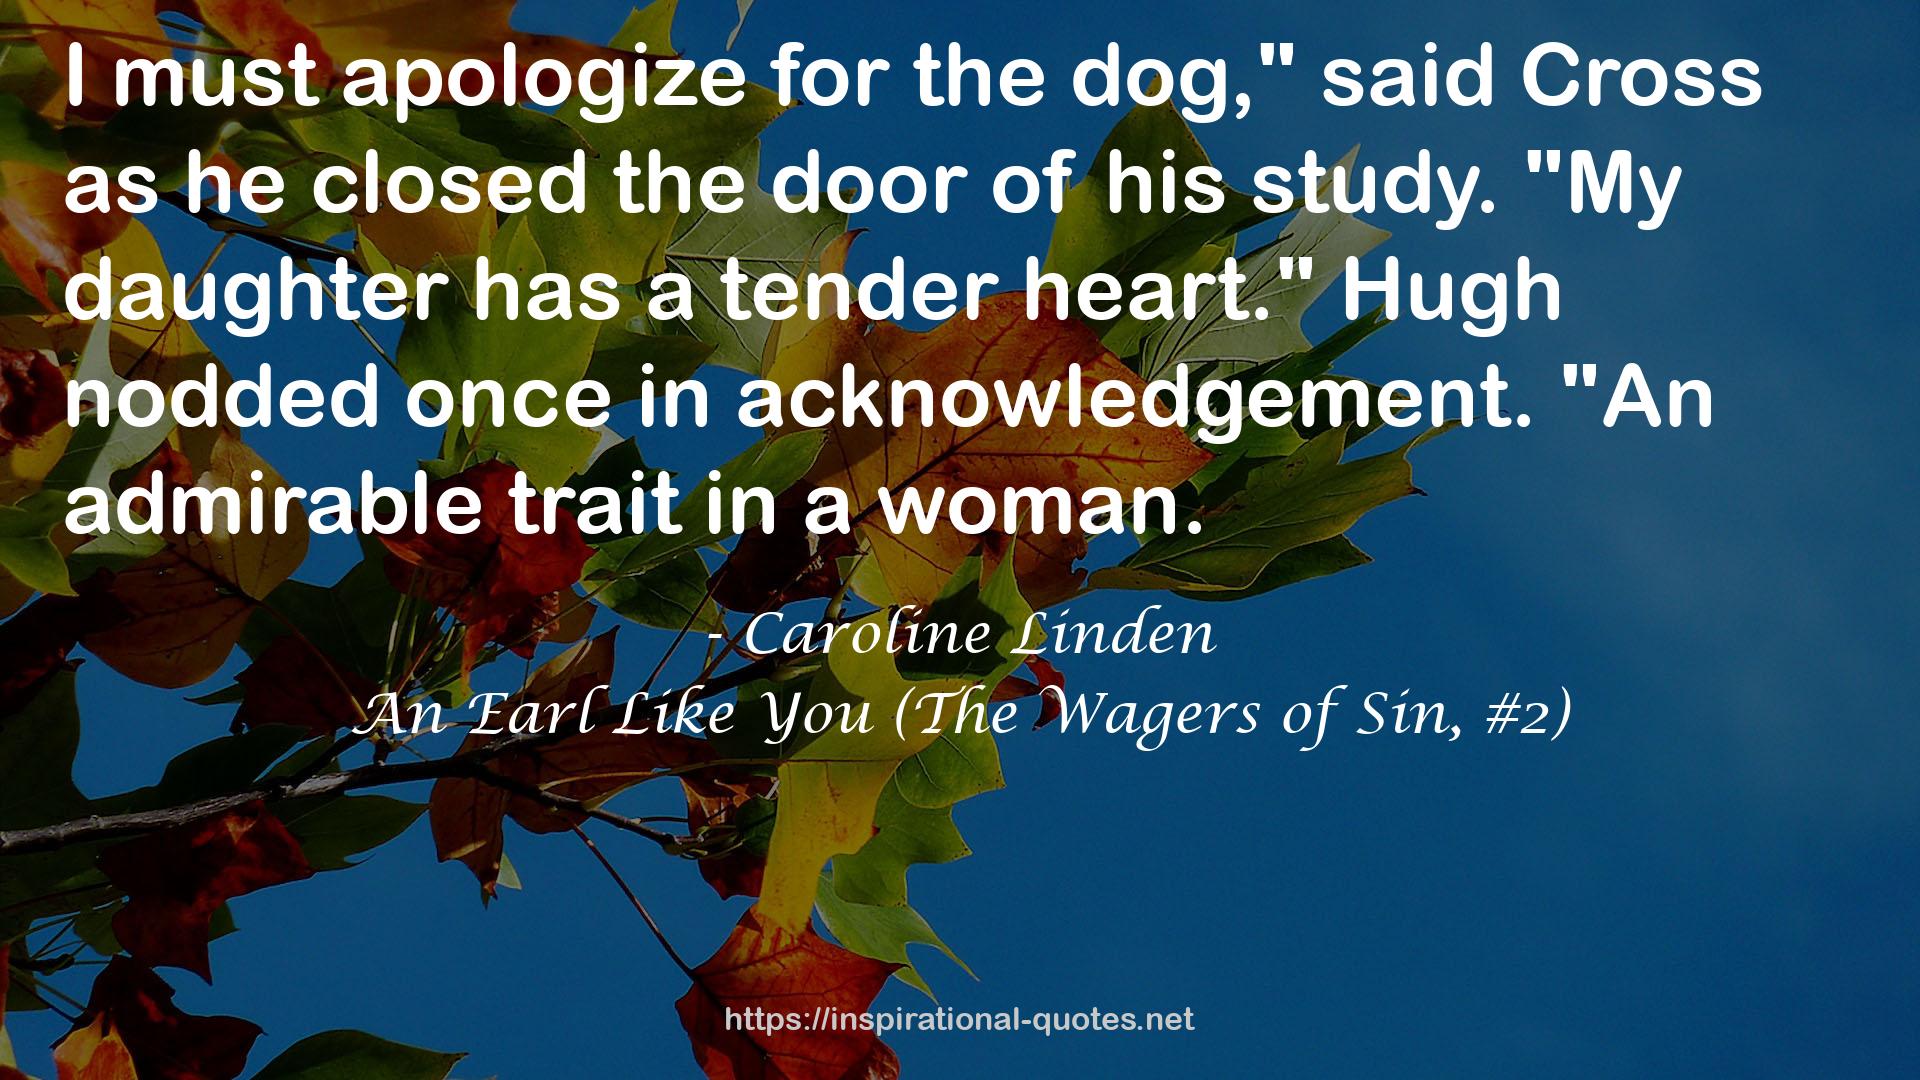 An Earl Like You (The Wagers of Sin, #2) QUOTES